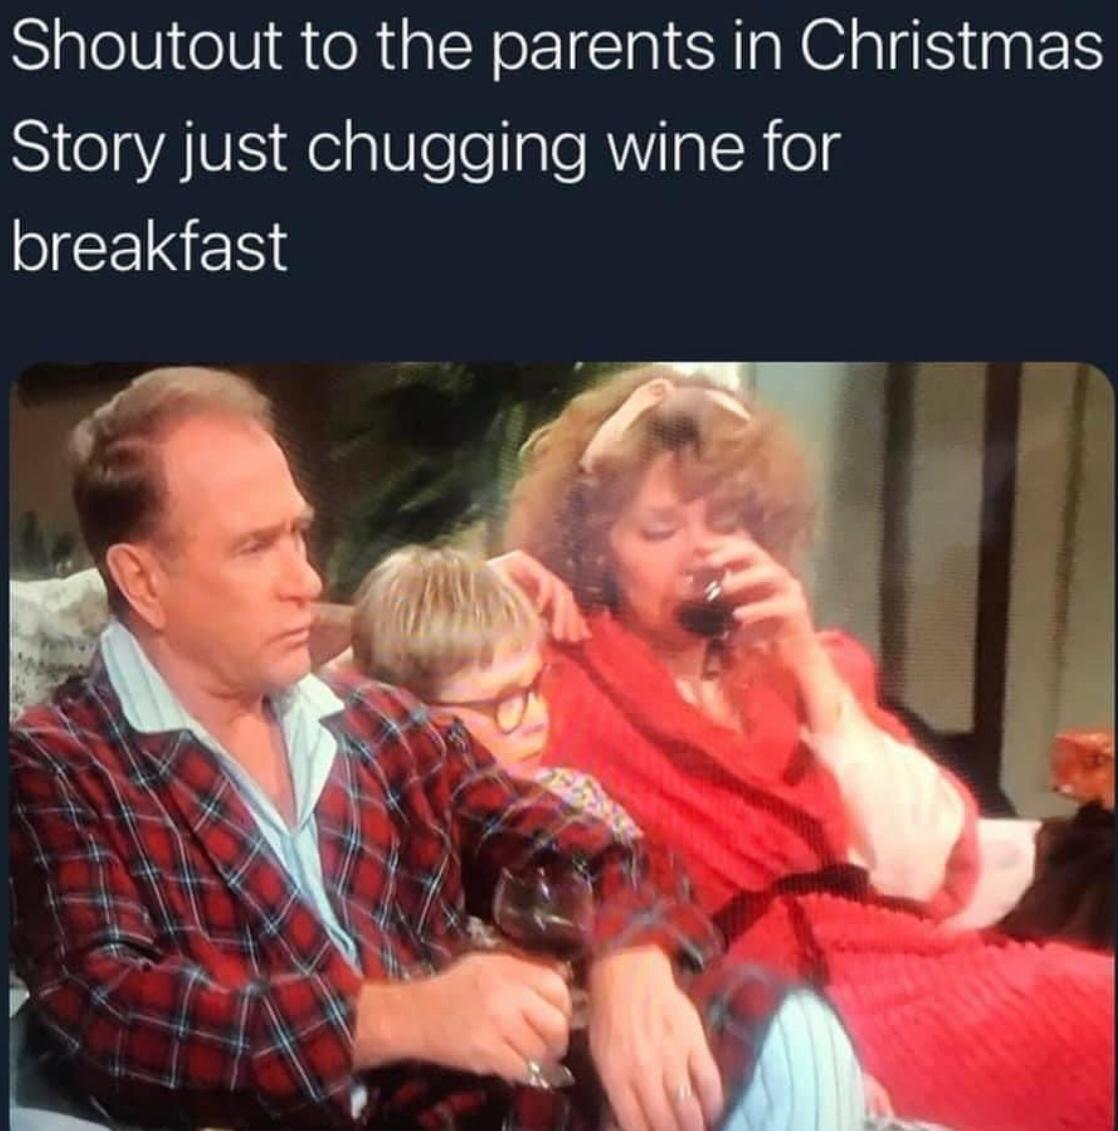 photo caption - Shoutout to the parents in Christmas Story just chugging wine for breakfast